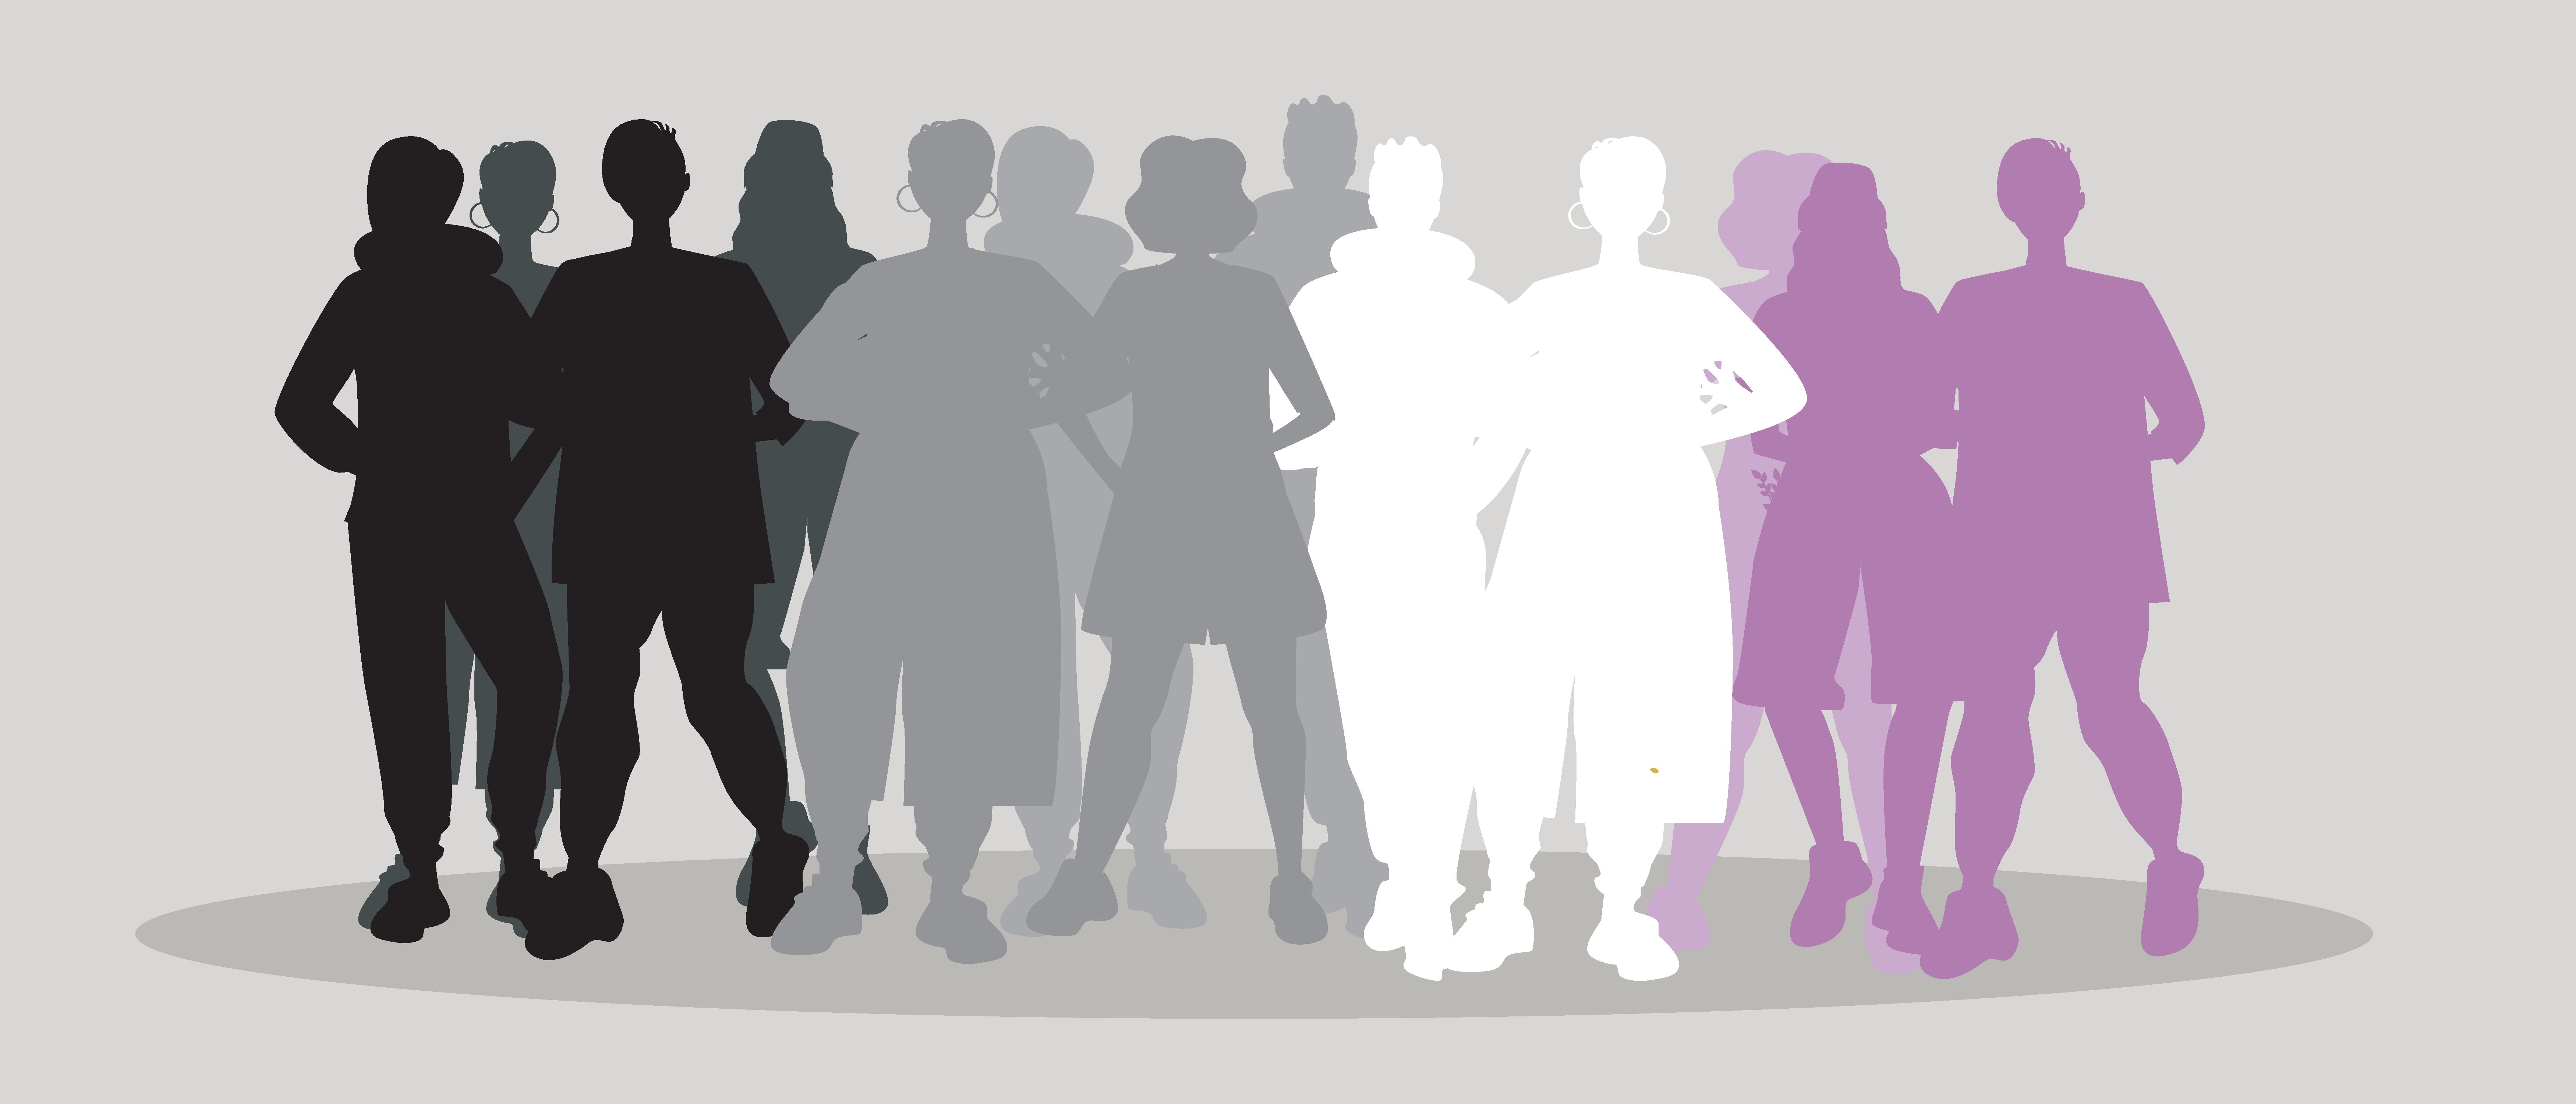 asexual people isolated as lgbtq bisexuality concept, flat vector stock illustration with silhouettes